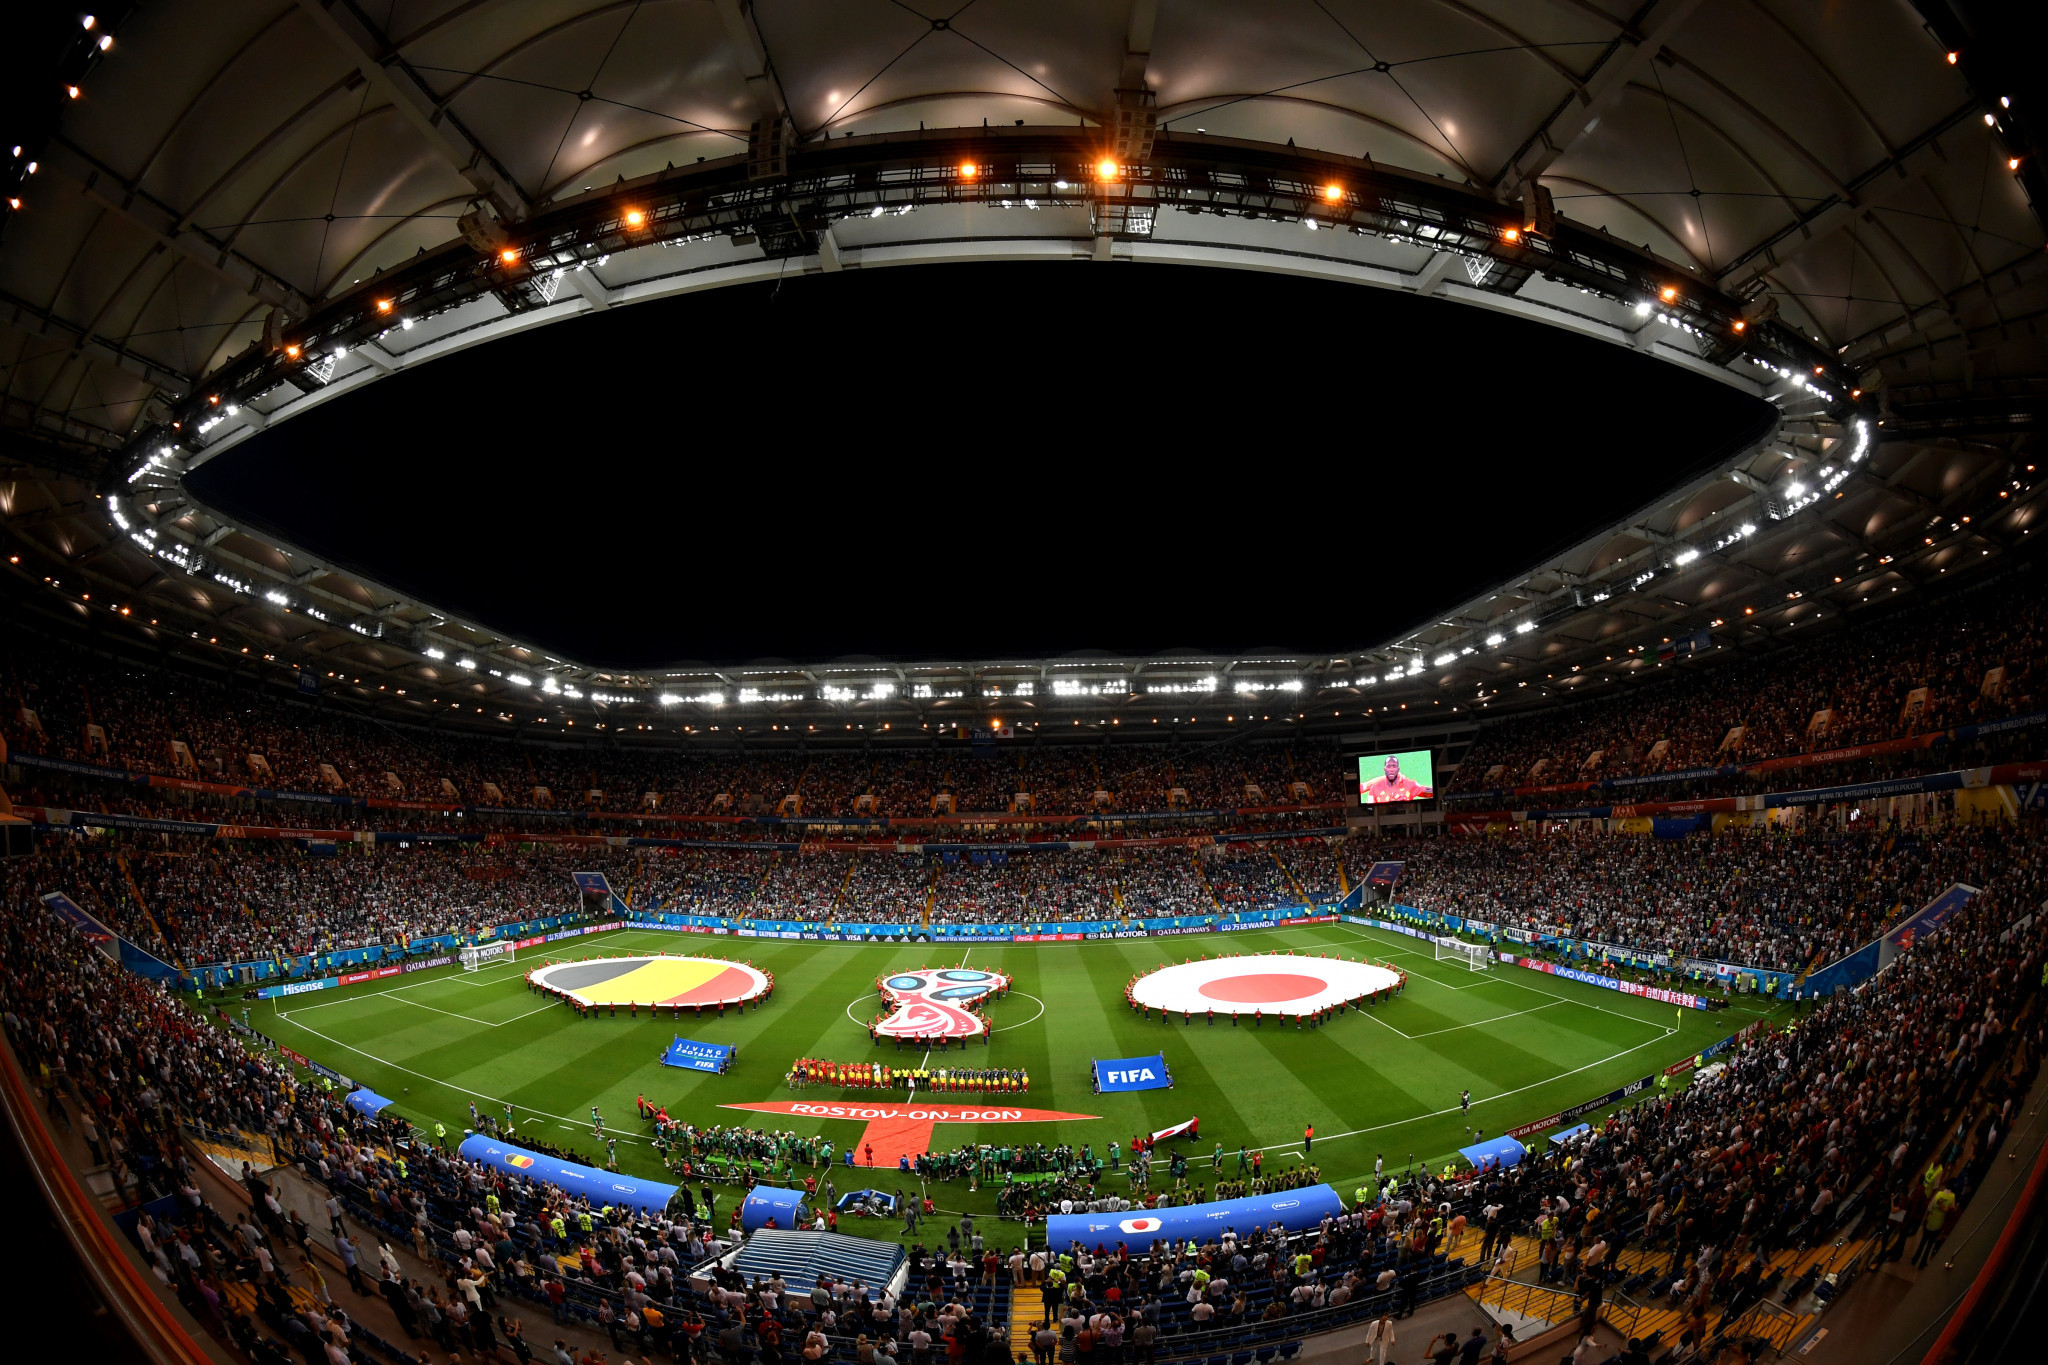 FIFA claim average of 98 per cent stadium occupancy during World Cup group stage